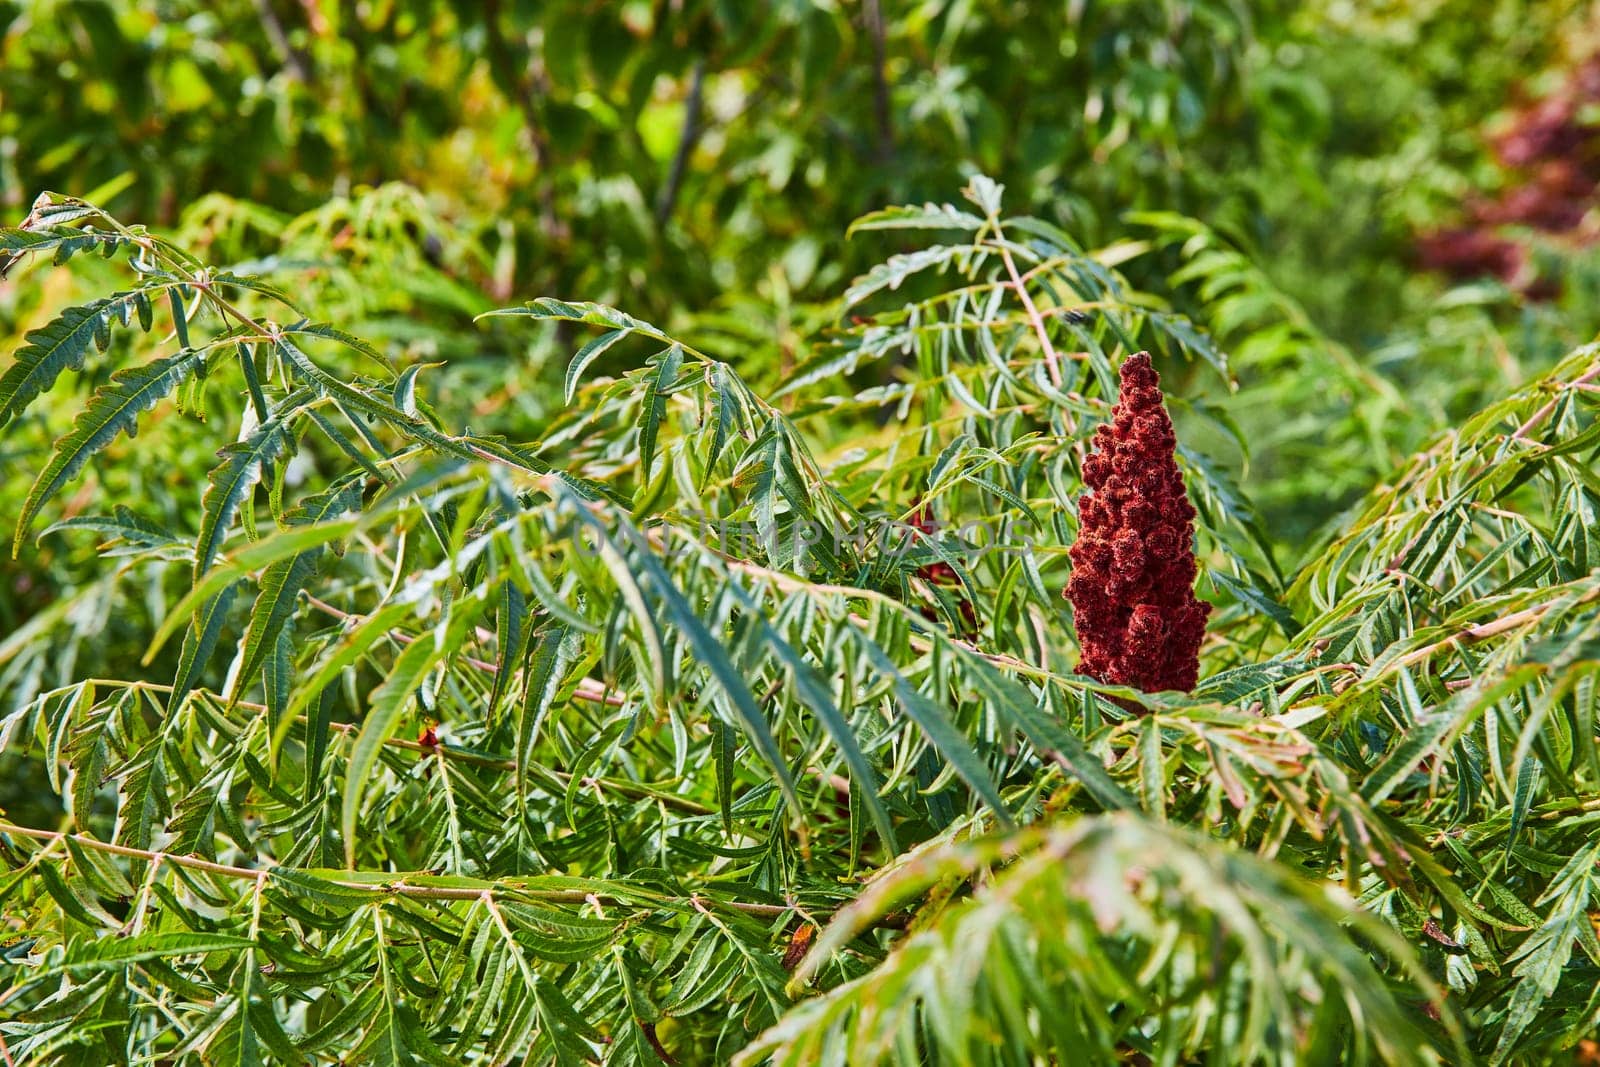 Sumac Plant in Full Bloom at Elkhart's Botanic Gardens, 2023 - Vibrant Capture of Natural Beauty and Ecological Diversity